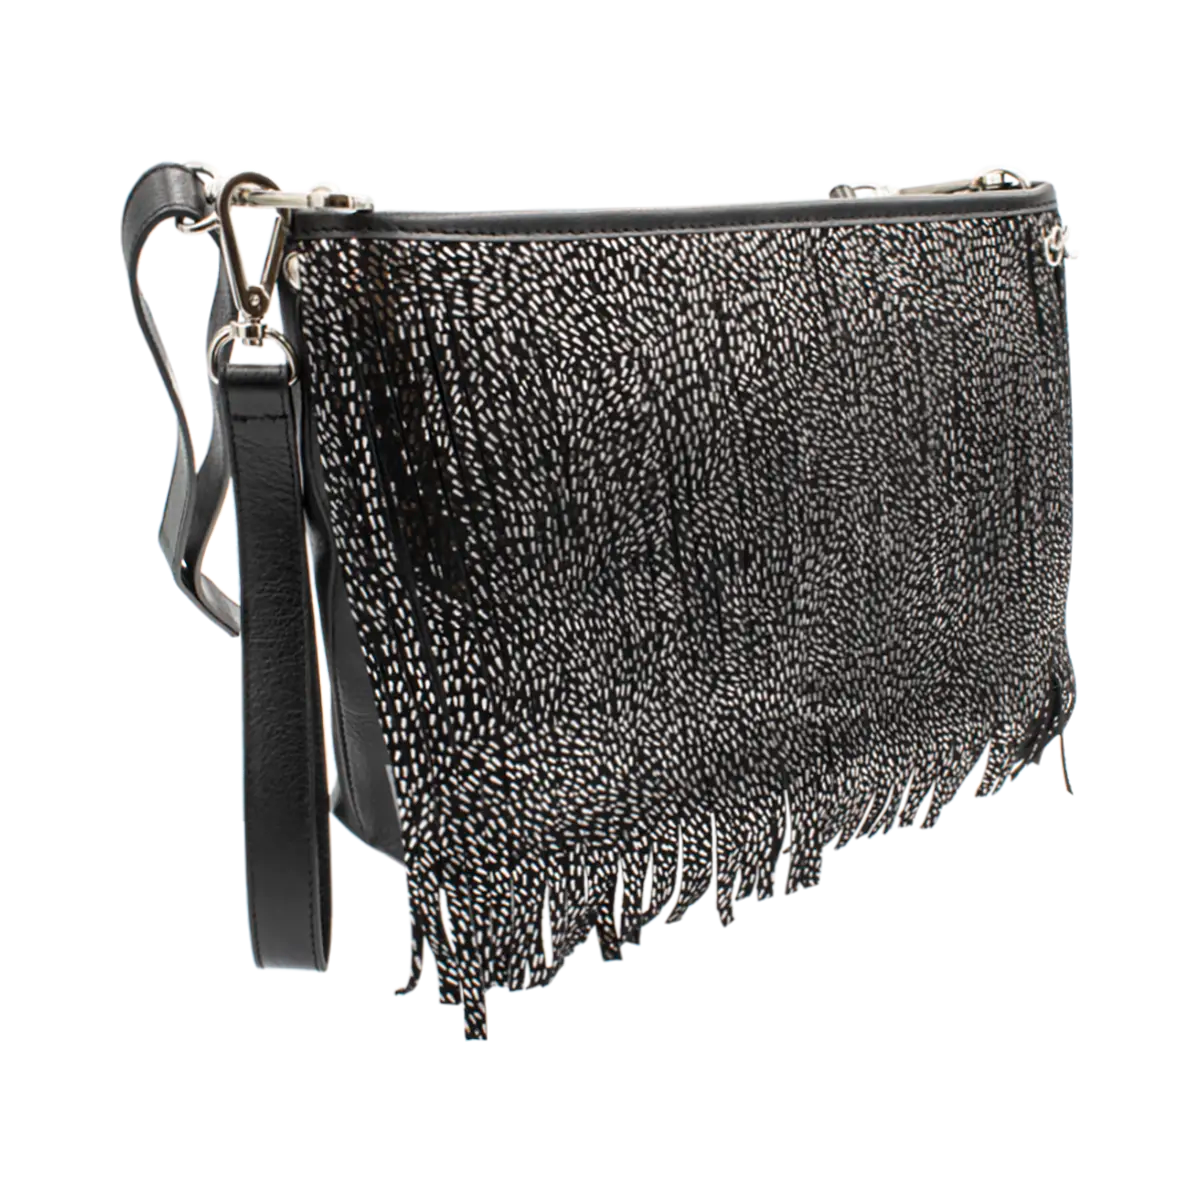 black silver stripe small black leather crossbody bag with fringe. Fashion accessory for women in San Diego, CA.